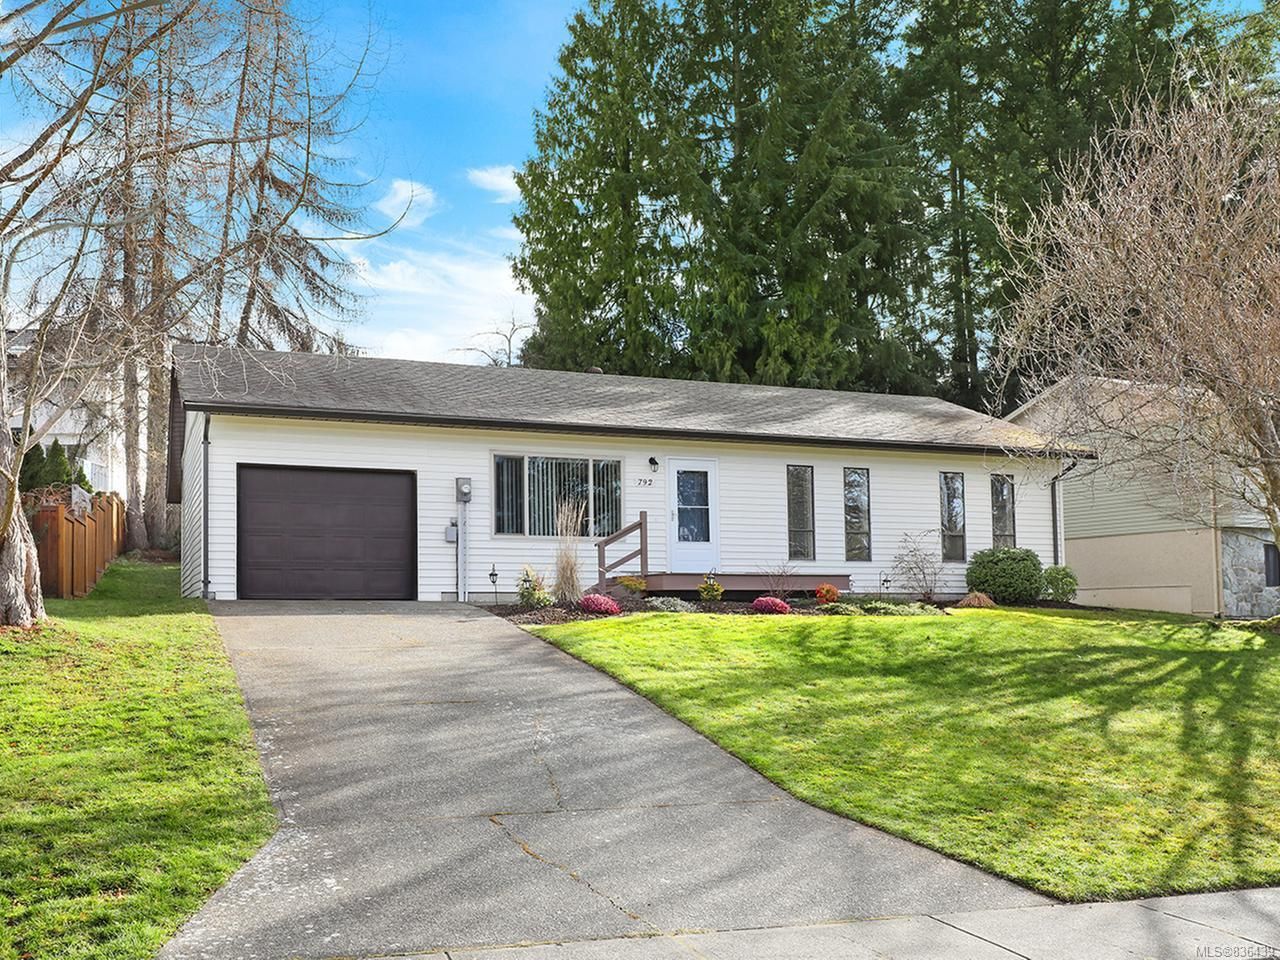 Main Photo: 792 Highwood Dr in COMOX: CV Comox (Town of) House for sale (Comox Valley)  : MLS®# 836439